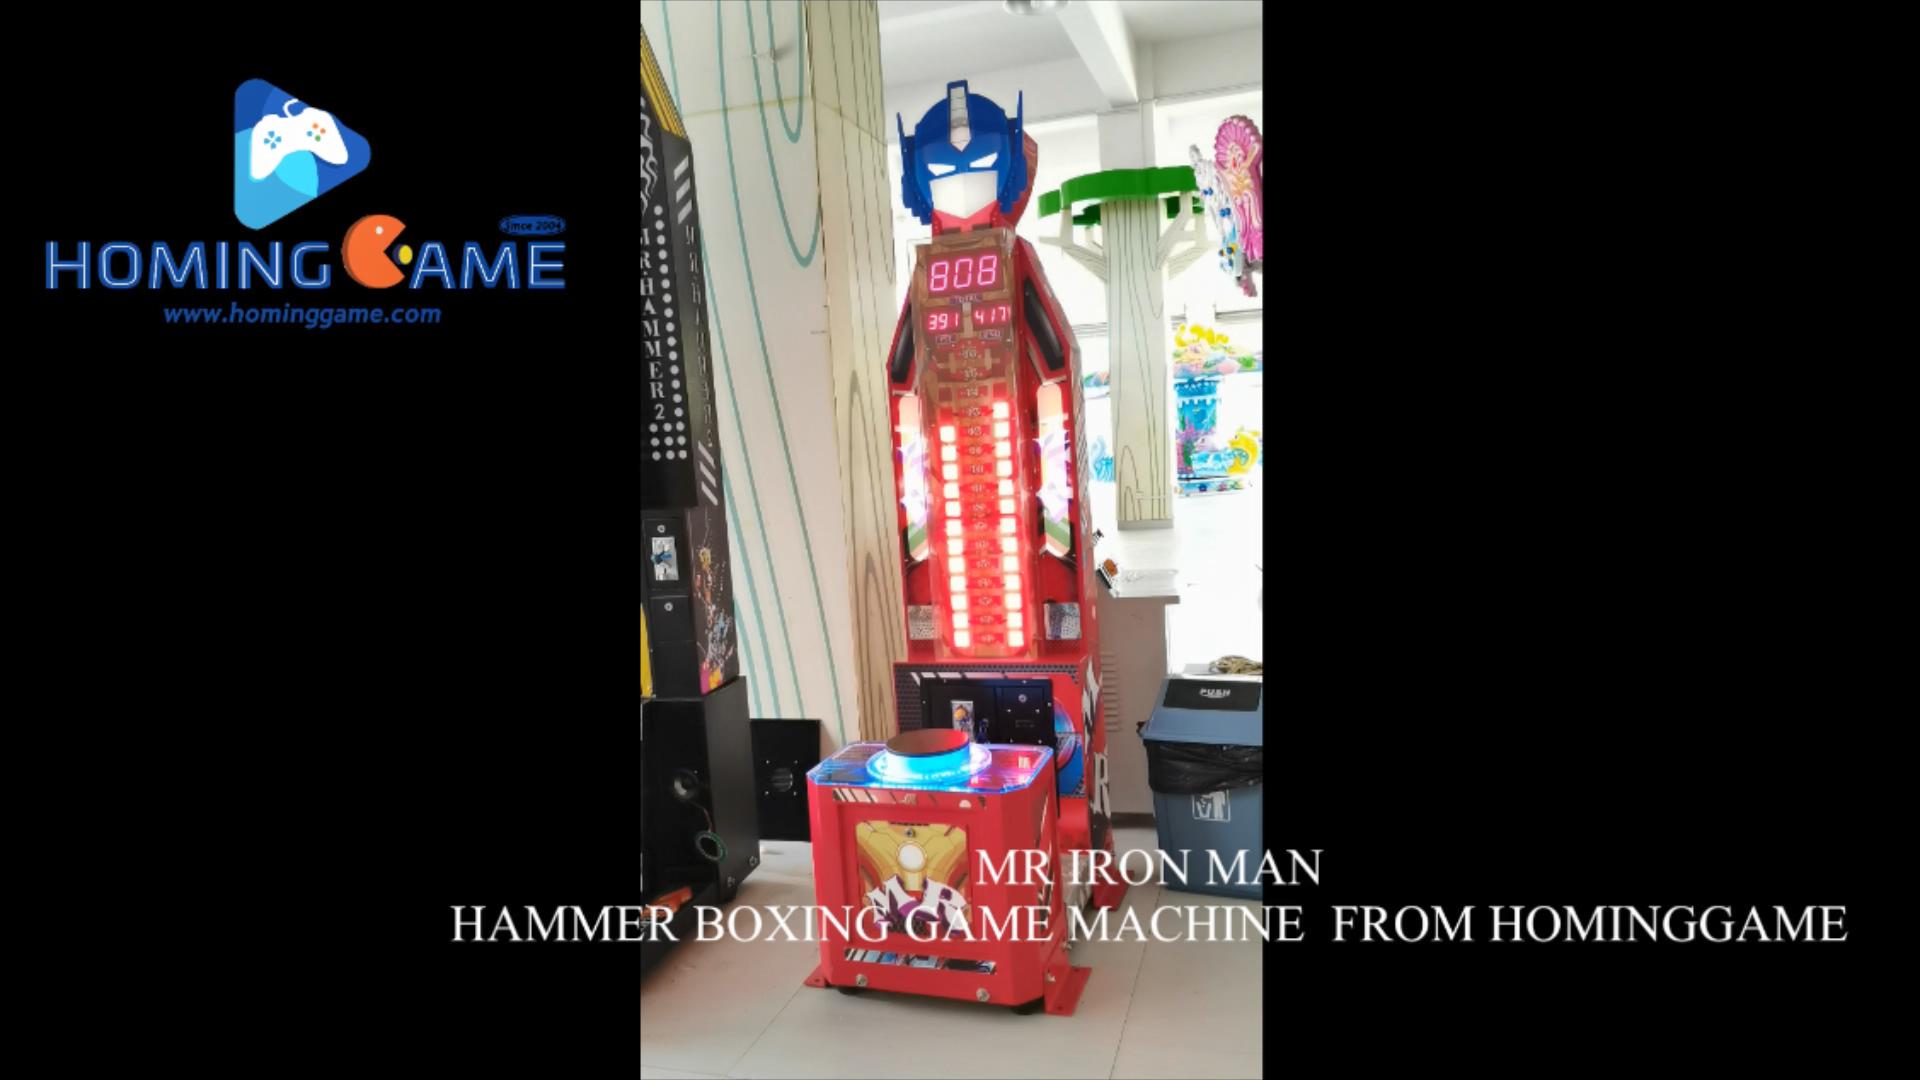 2020 HomingGame very funny competitive hammer arcade Mr IronMan Hammer arcade boxing game machine(Order Call Whatsapp:+8618688409495),mr ironman boxing game machine,mr hammer 2 arcade game machine,mr hammer 2 boxing arcade game machine,mr hammer 2 amusement boxing arcade game machine,mr hammer 2 king of hammer arcade game machine,king of hammer arcade game mahcine,king of hammer,hammer arcade game,hammer boxing arcade game machine,hammer boxing game machine,coin operated mr hammer 2 boxing arcade game machine,coin operated king of hammer arcade game machine,game machine,arcade game machine,coin operated game machine,amusement park game equipment,amusement machine,entertainment game,family entertainment game machine,entertainment machine,indoor game machine,lottery game machine,redemption game machine,redemption game,arcade games,arcade game machine for sale,hominggame,www.gametube.hk,hammer machine,kids game equipment,kids lottery game machine,FEC game center game machine,FEC game,electrical kids game machine,children game machine,redemption ticket game machine